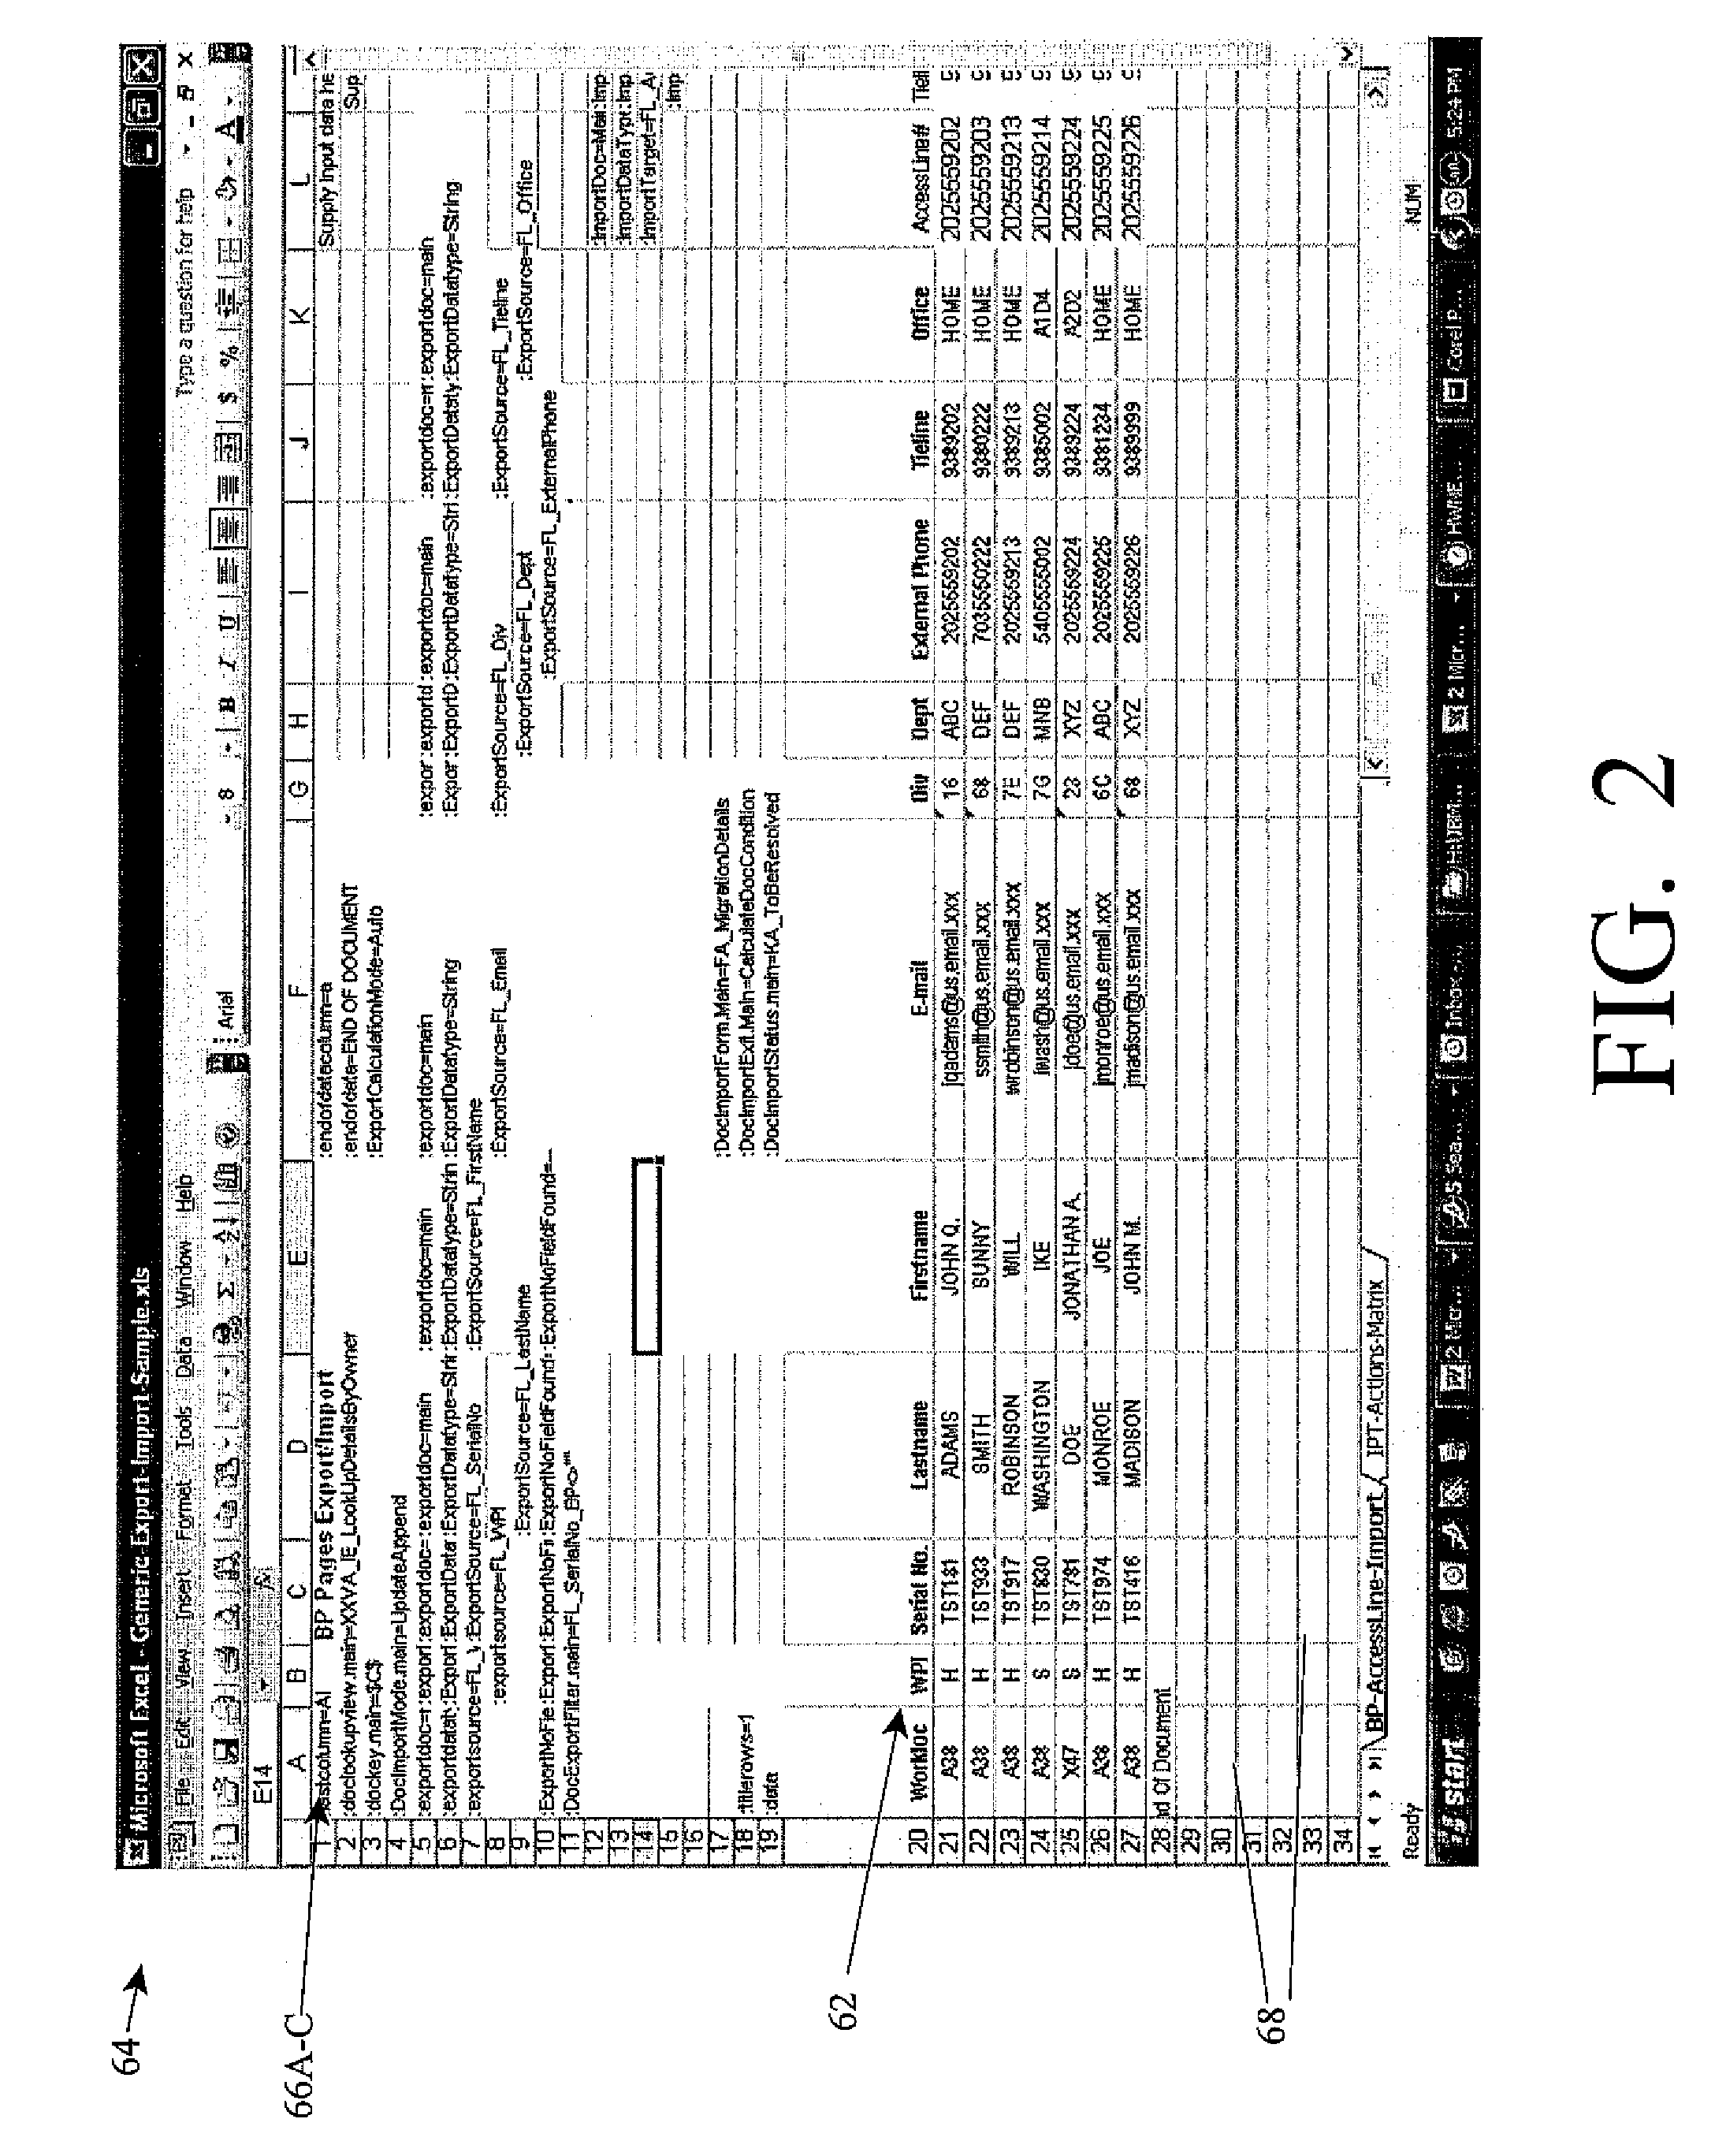 Method, system and program product for defining imports into and exports out from a database system using spread sheets by use of a control language